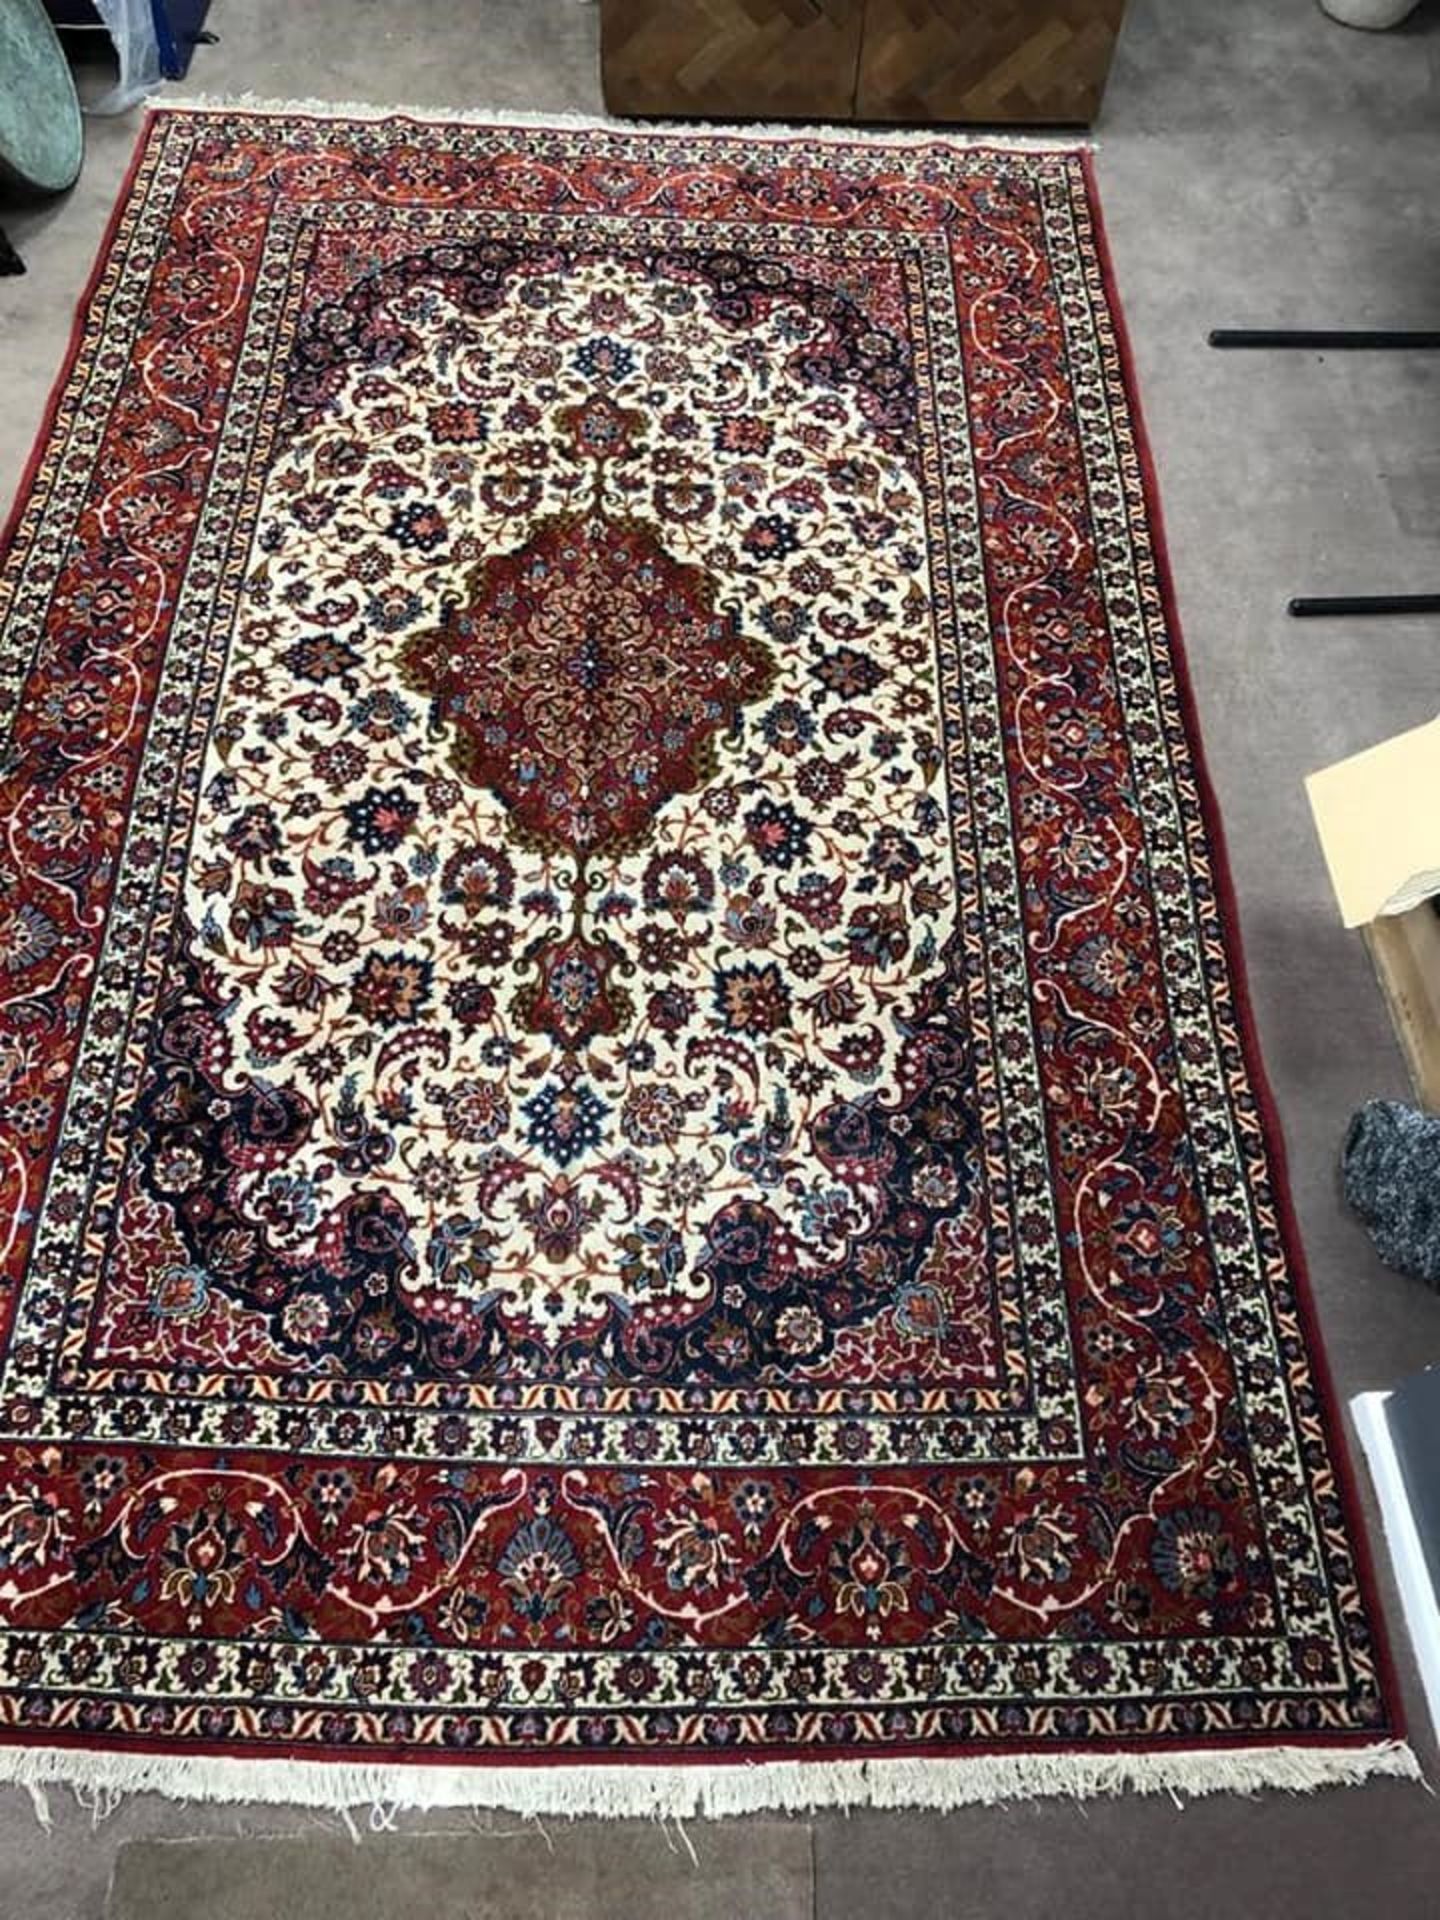 Hand Made Isfahan Antique Carpet 360 X 237cm Isfahan Stands For Beauty The City And Its Wonderful